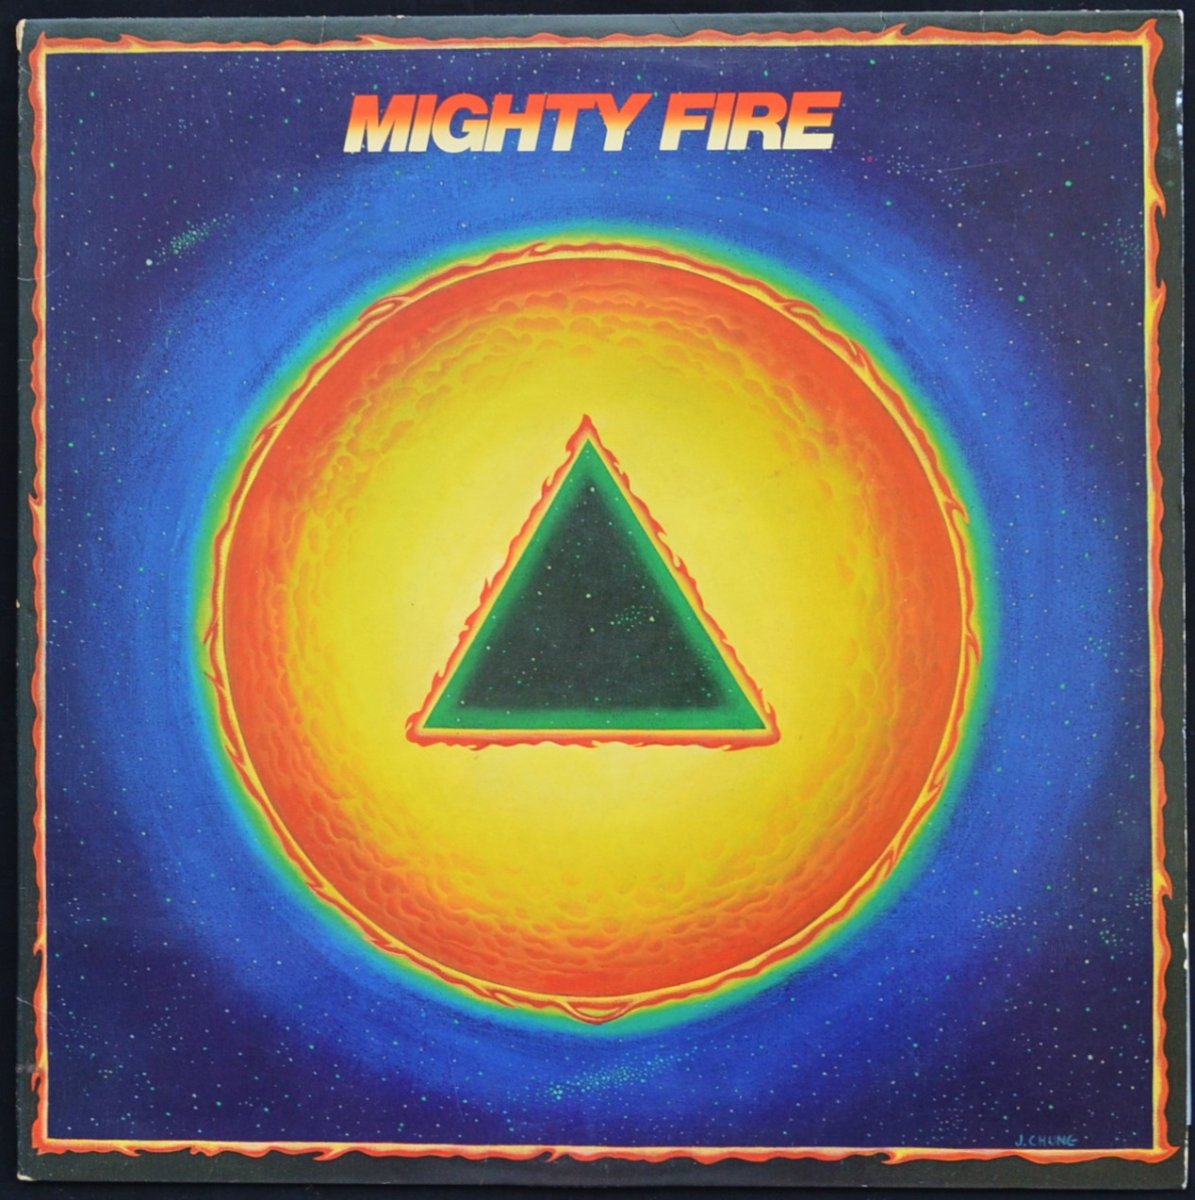 MIGHTY FIRE / MIGHTY FIRE (LP)